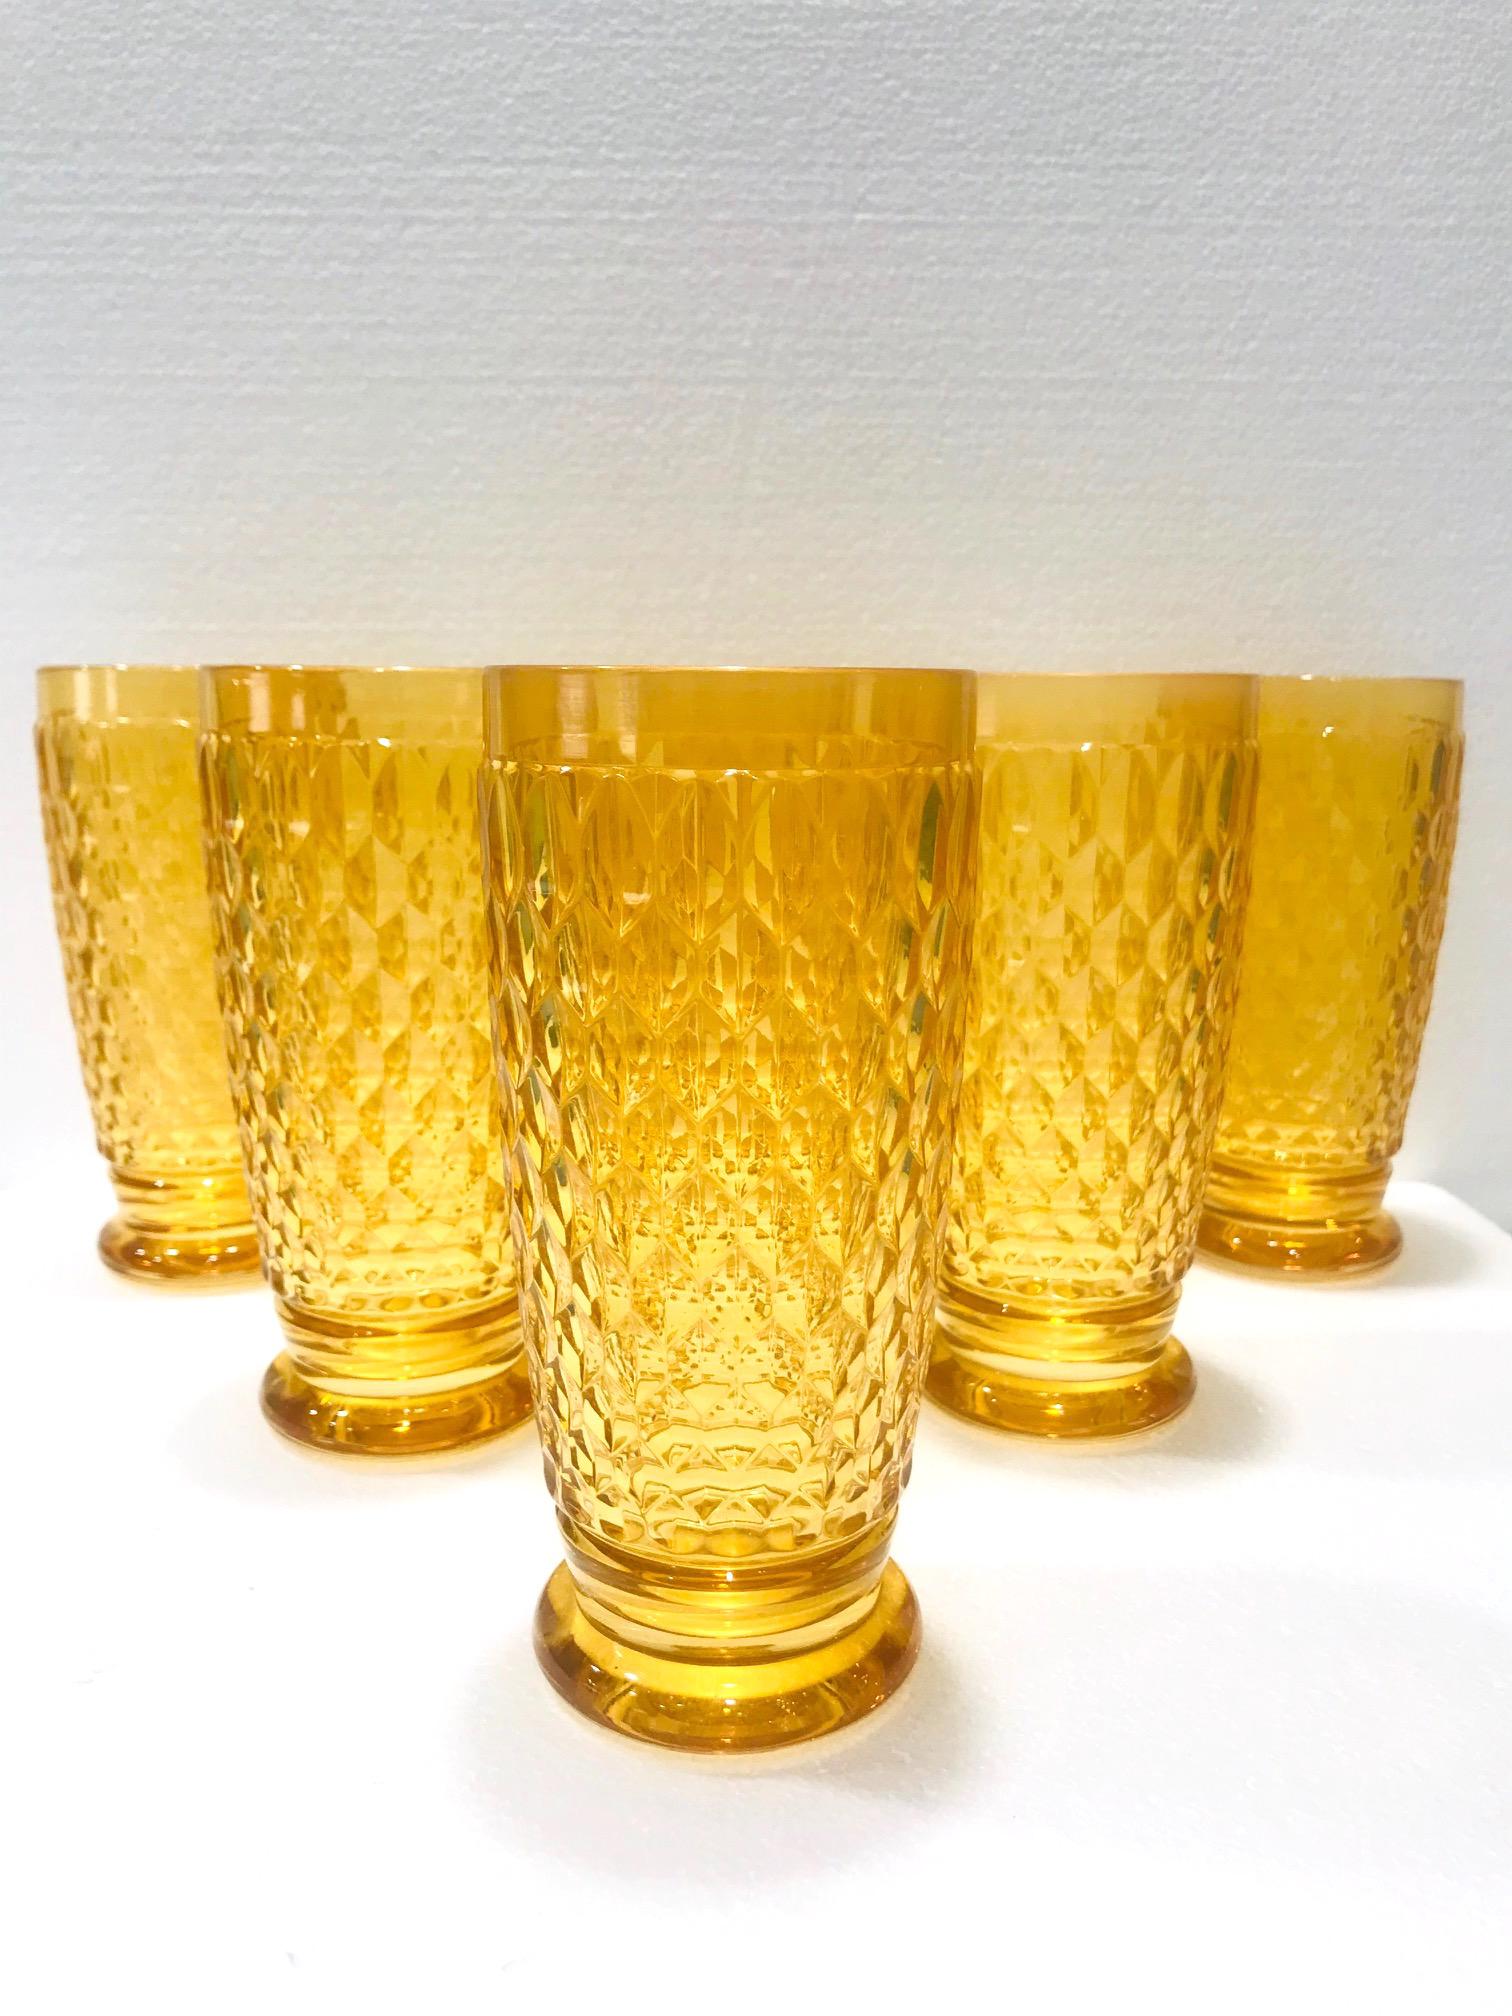 Set of seven vintage crystal highball glasses from Villeroy & Boch, Germany. Handcrafted glasses comprised of hobnail crystal with a Classic diamond pattern and with rounded bases. In gorgeous amber yellow colored glass, making them a unique and